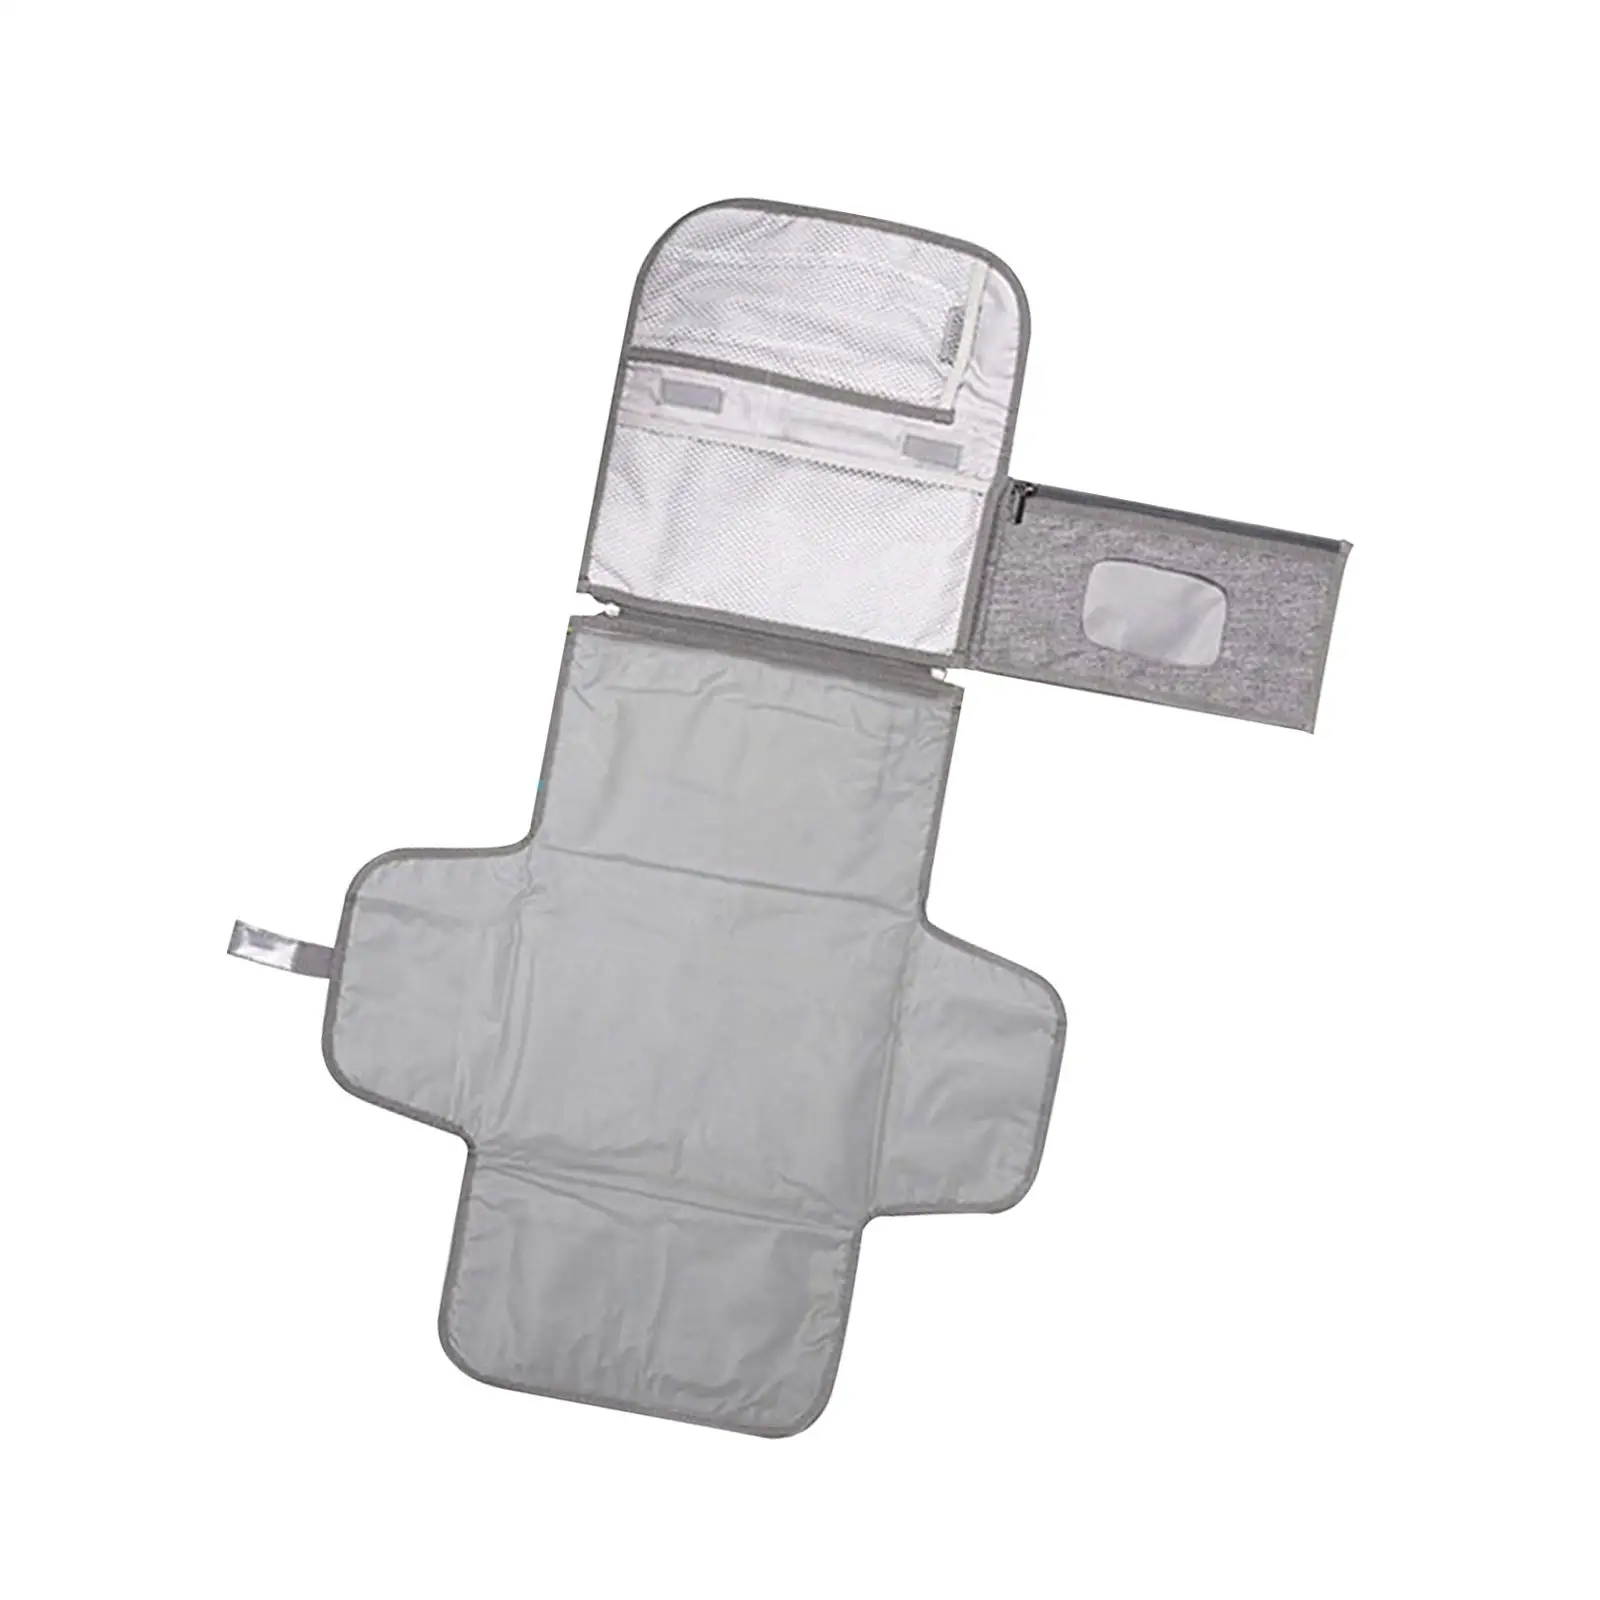 Diaper Changing Pad with Wipes Pocket Lightweight Folding Waterproof Travel